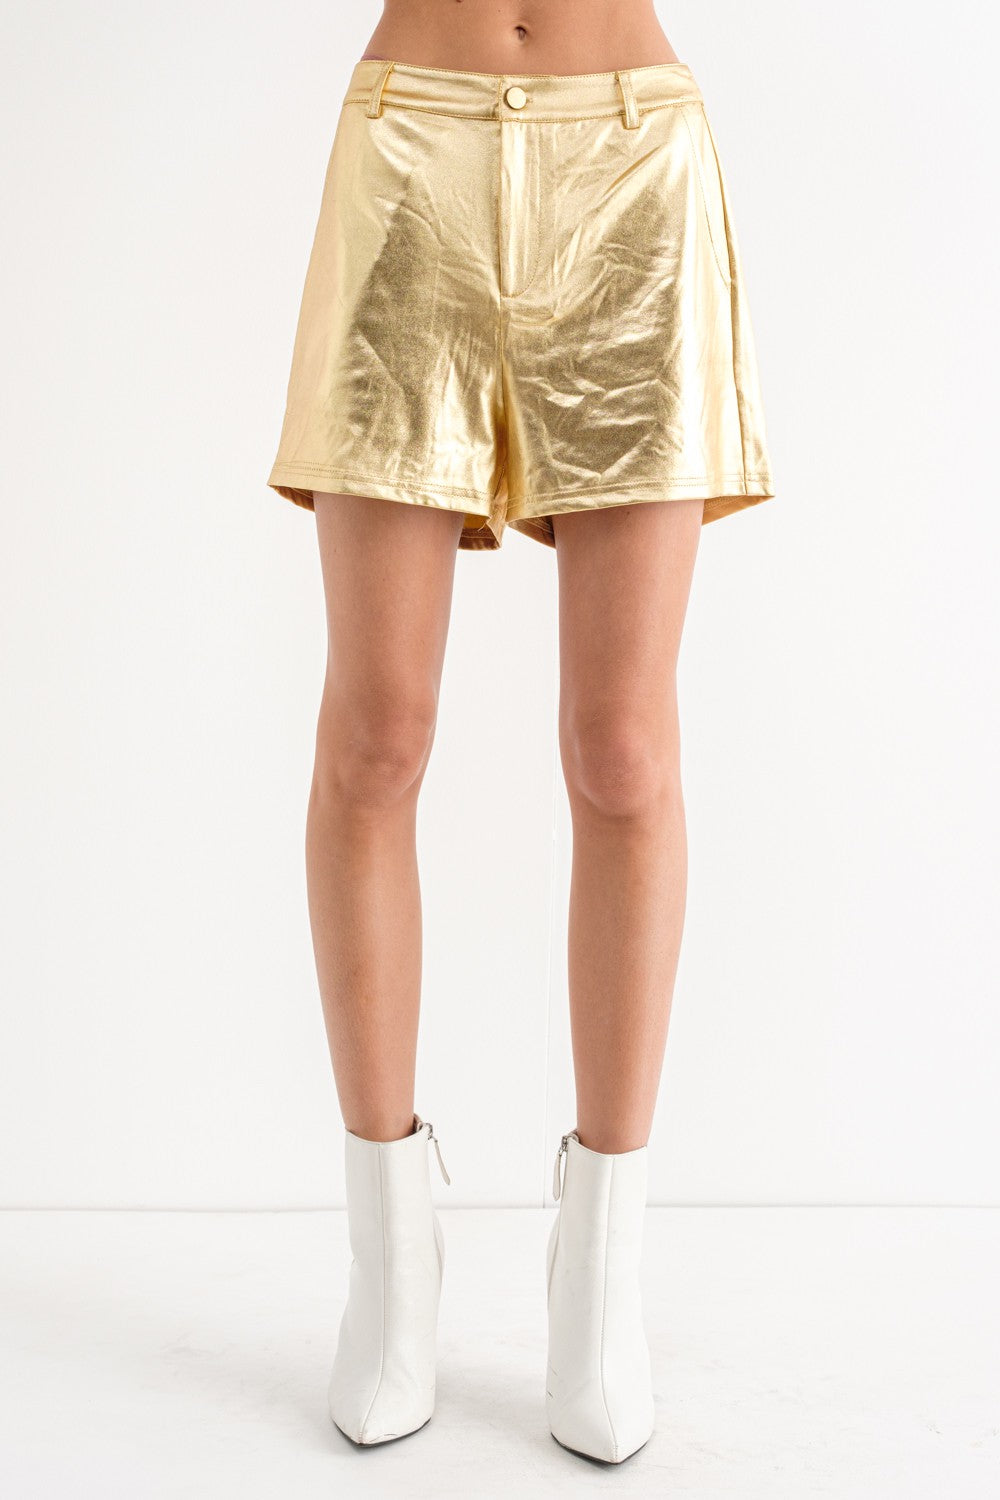 Going For Gold Shorts